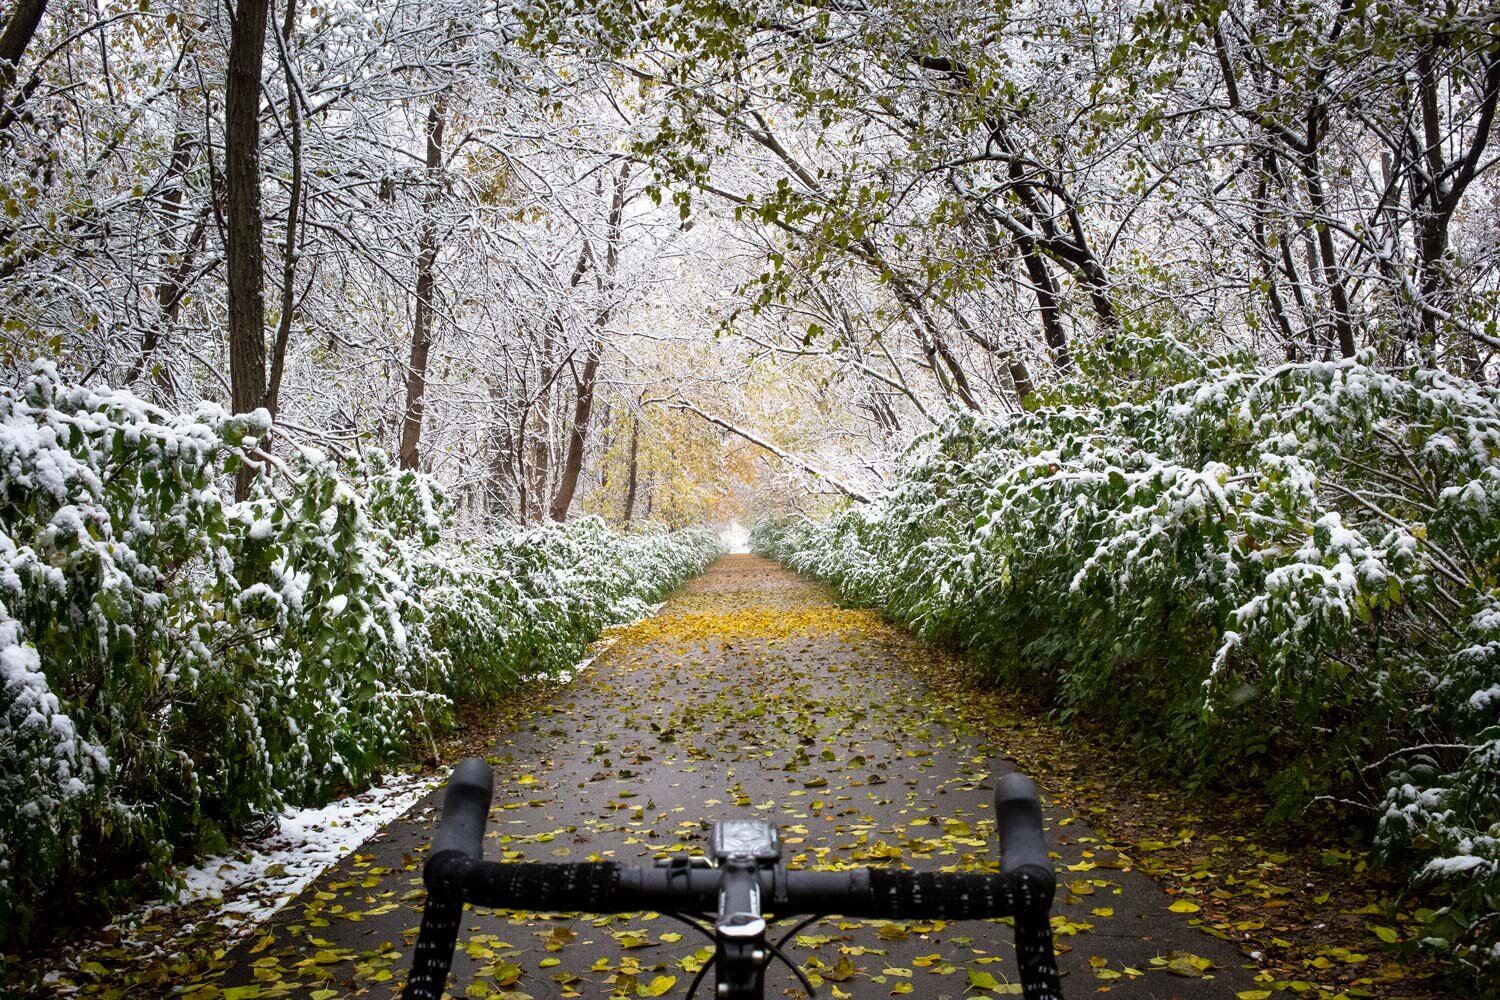  Bike ride with snow on the Interurban Trail to Lake Springfield Friday, Nov. 9, 2018  Pawnee, Ill. [Rich Saal/The State Journal-Register] 